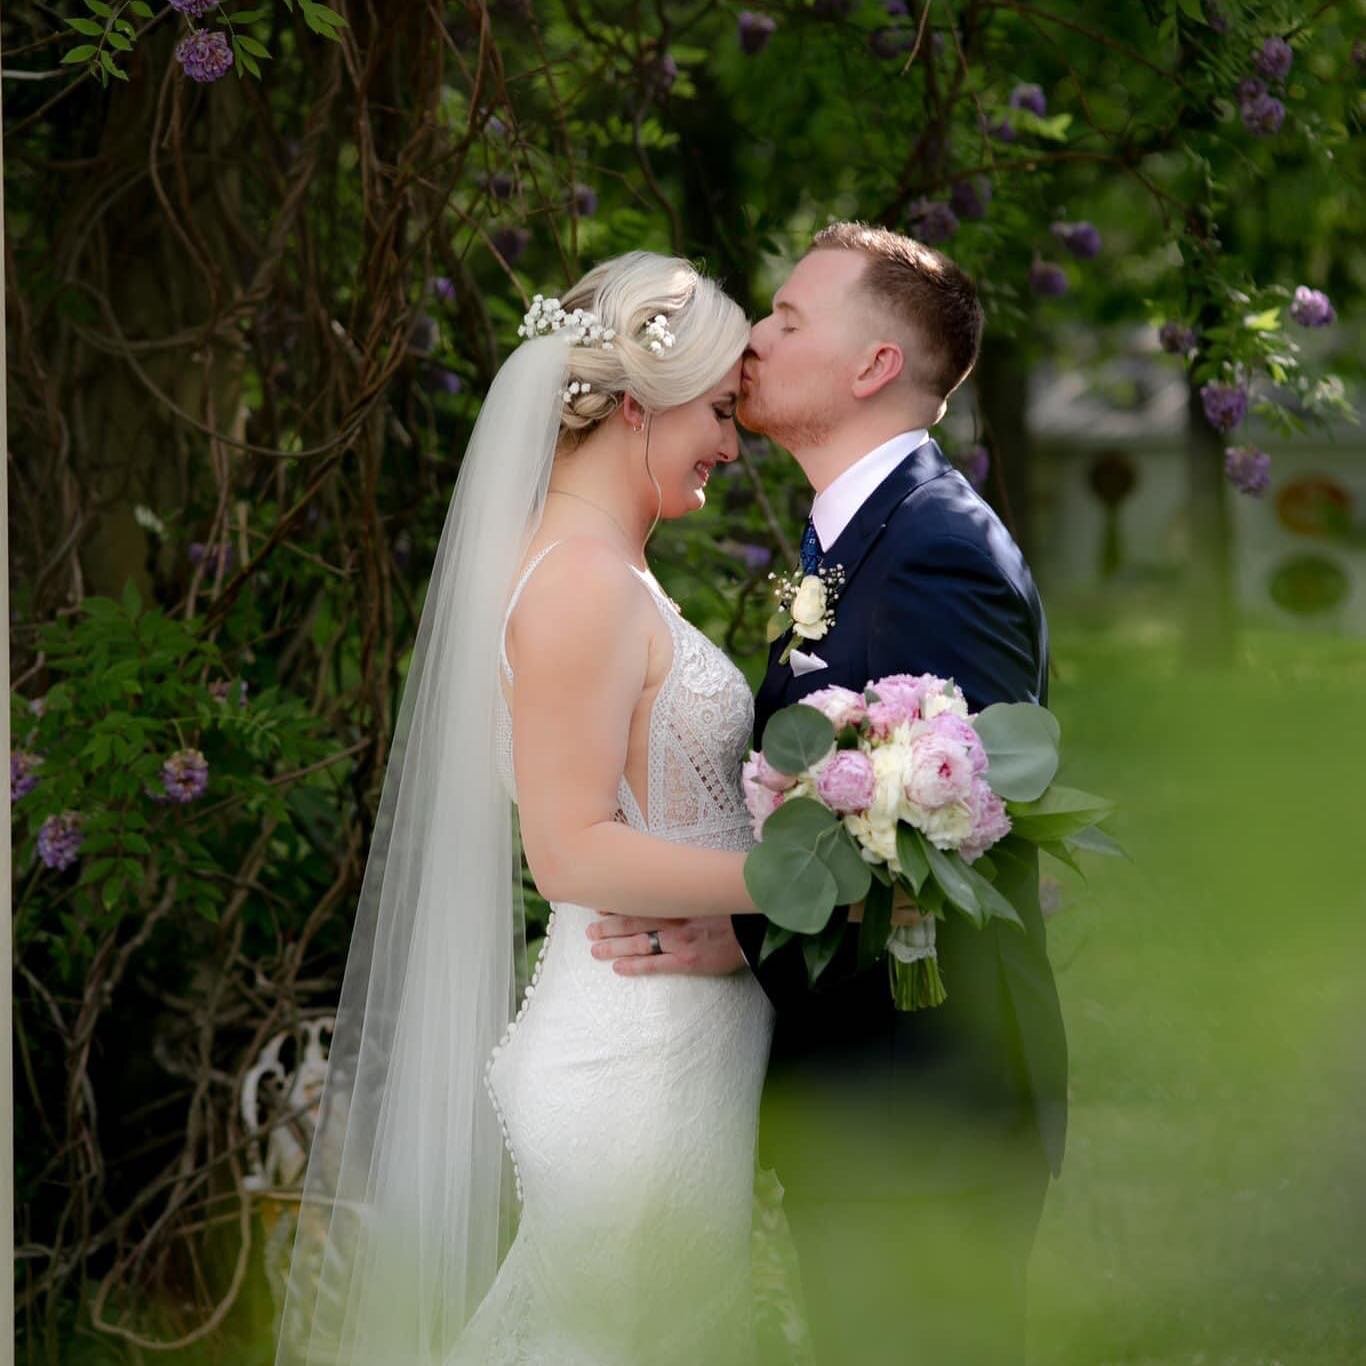 Kiss on the forehead 💋 Beautiful flowers 🌺 Dreamy blur at the front of the frame 😍 We love this soft, romantic photo of this amazing couple by @ashleydortonphotography ❤️
.
.
.
#springwedding #virginiaisforlovers #virginiaweddings #vaweddings #vav